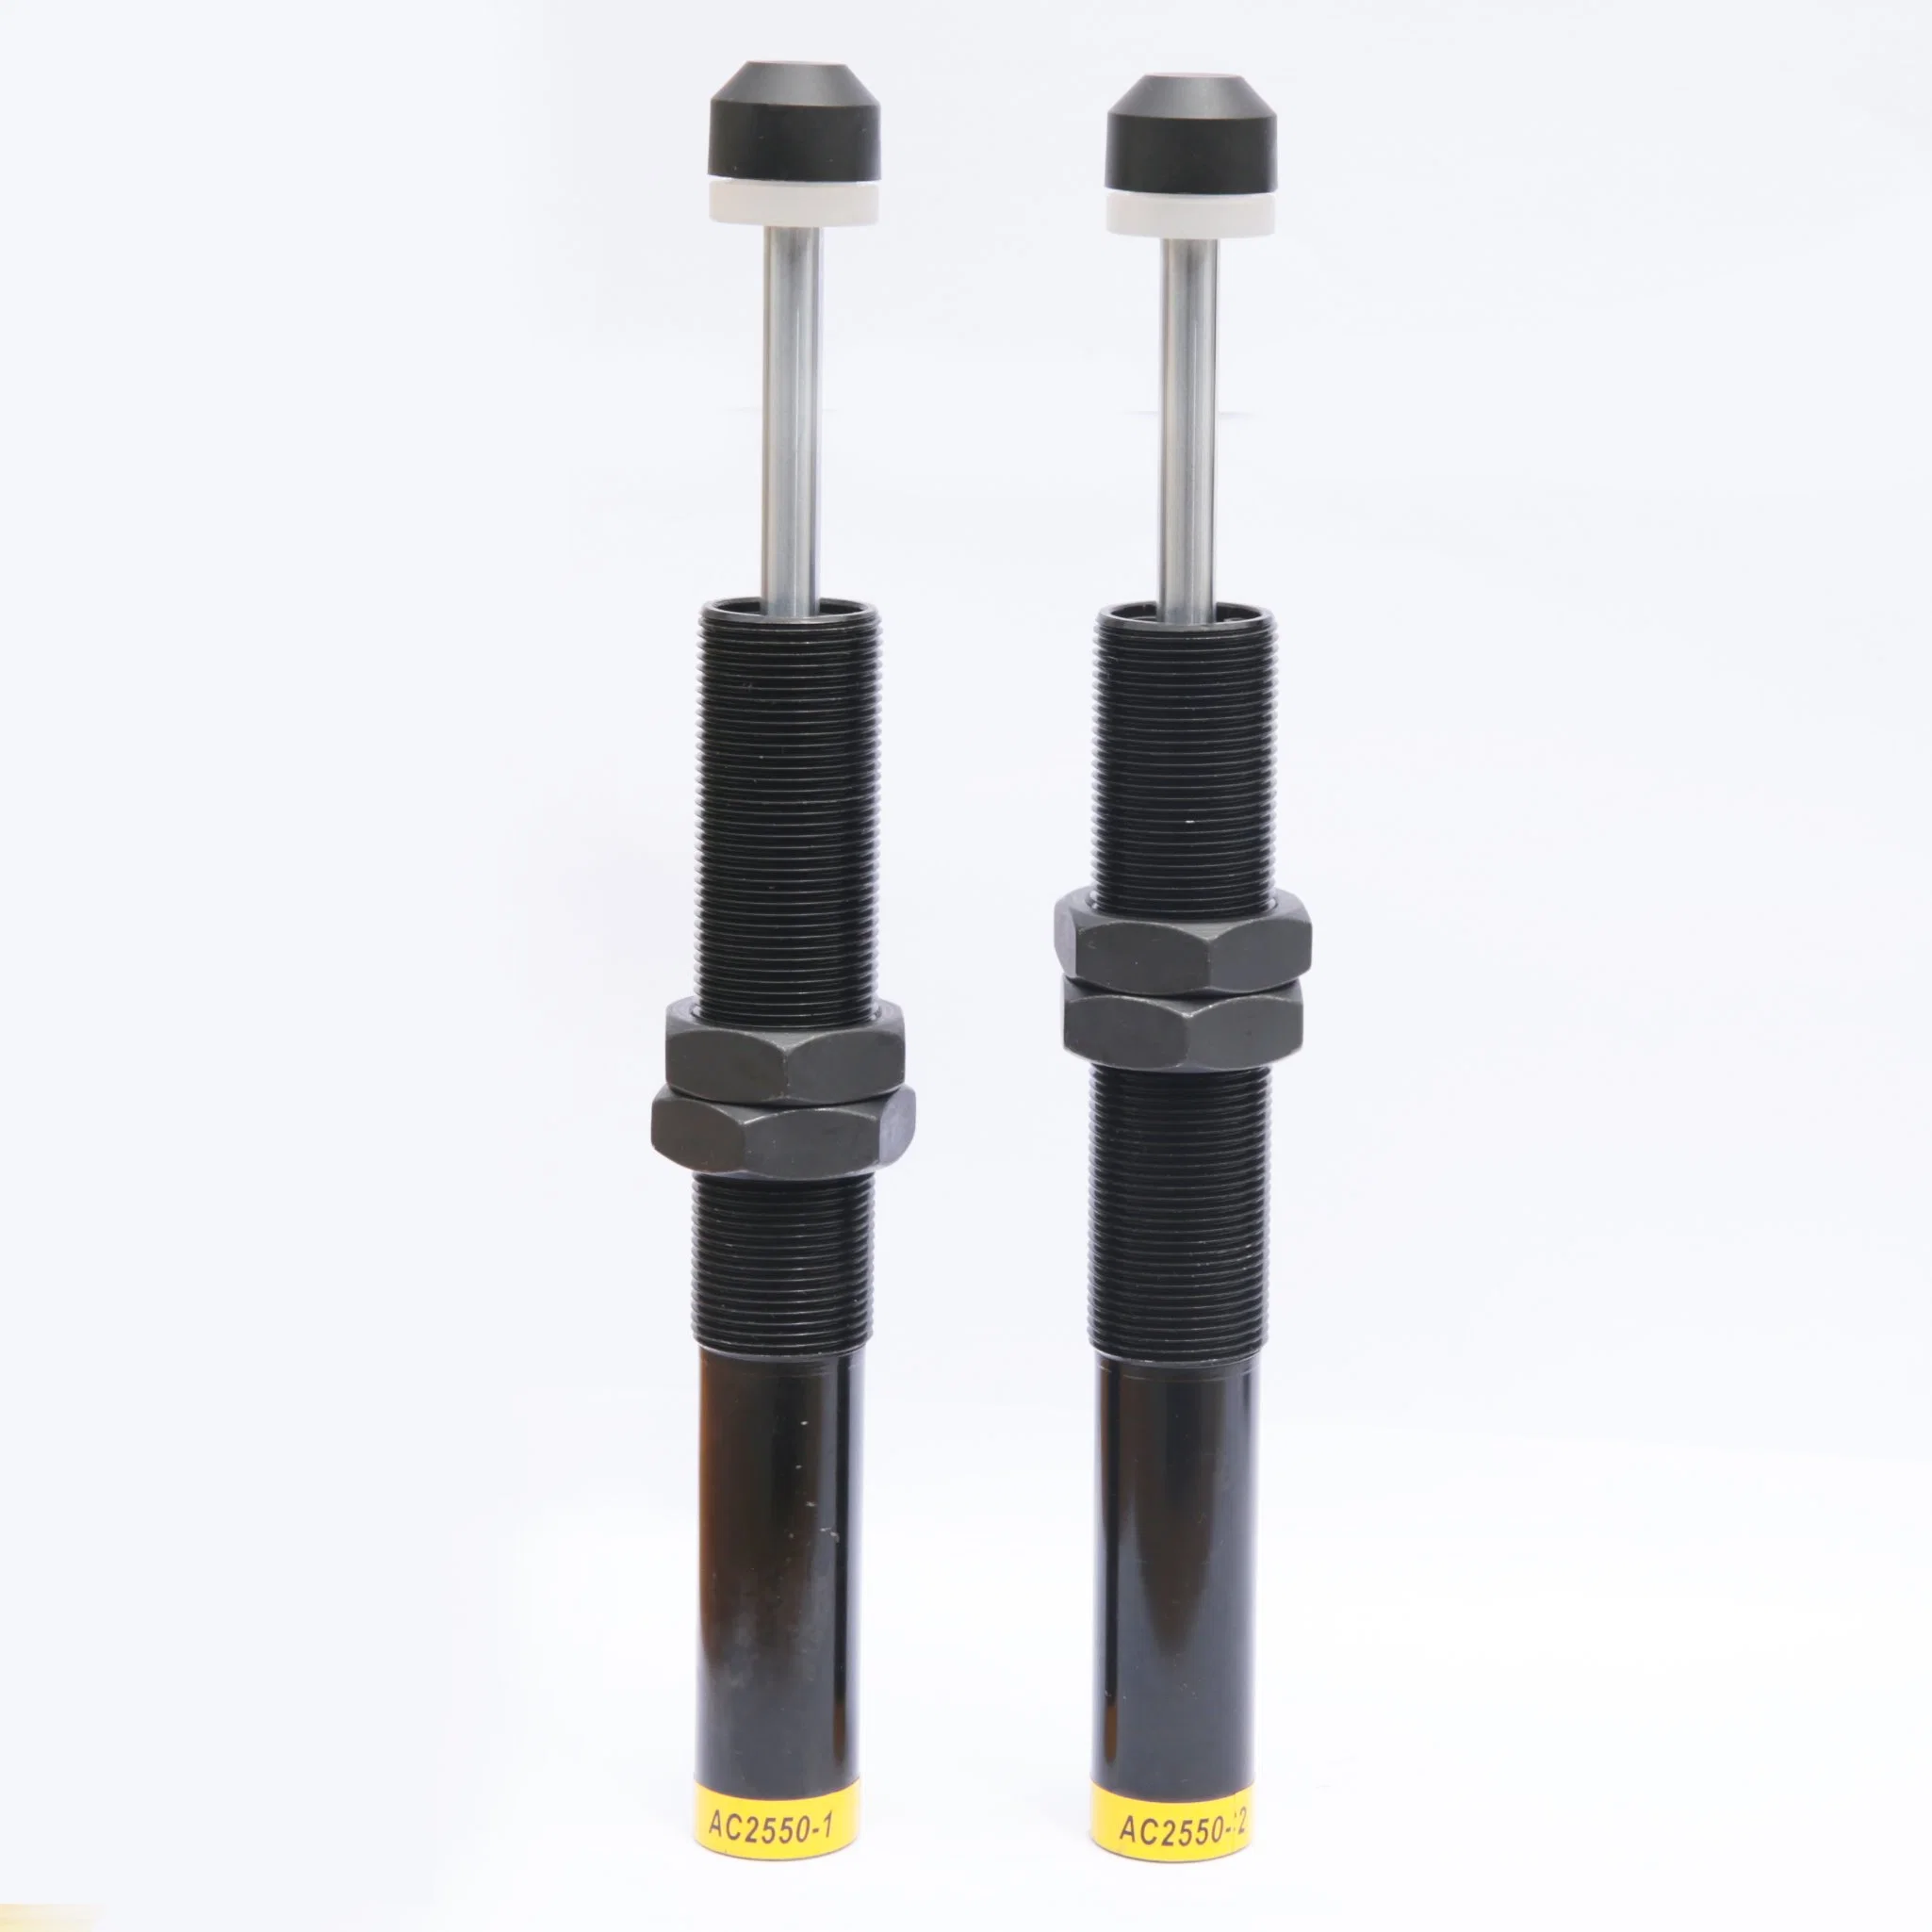 Ad1410 Adjustable Type Pneumatic Shock Absorbers for Combined Air Pressure